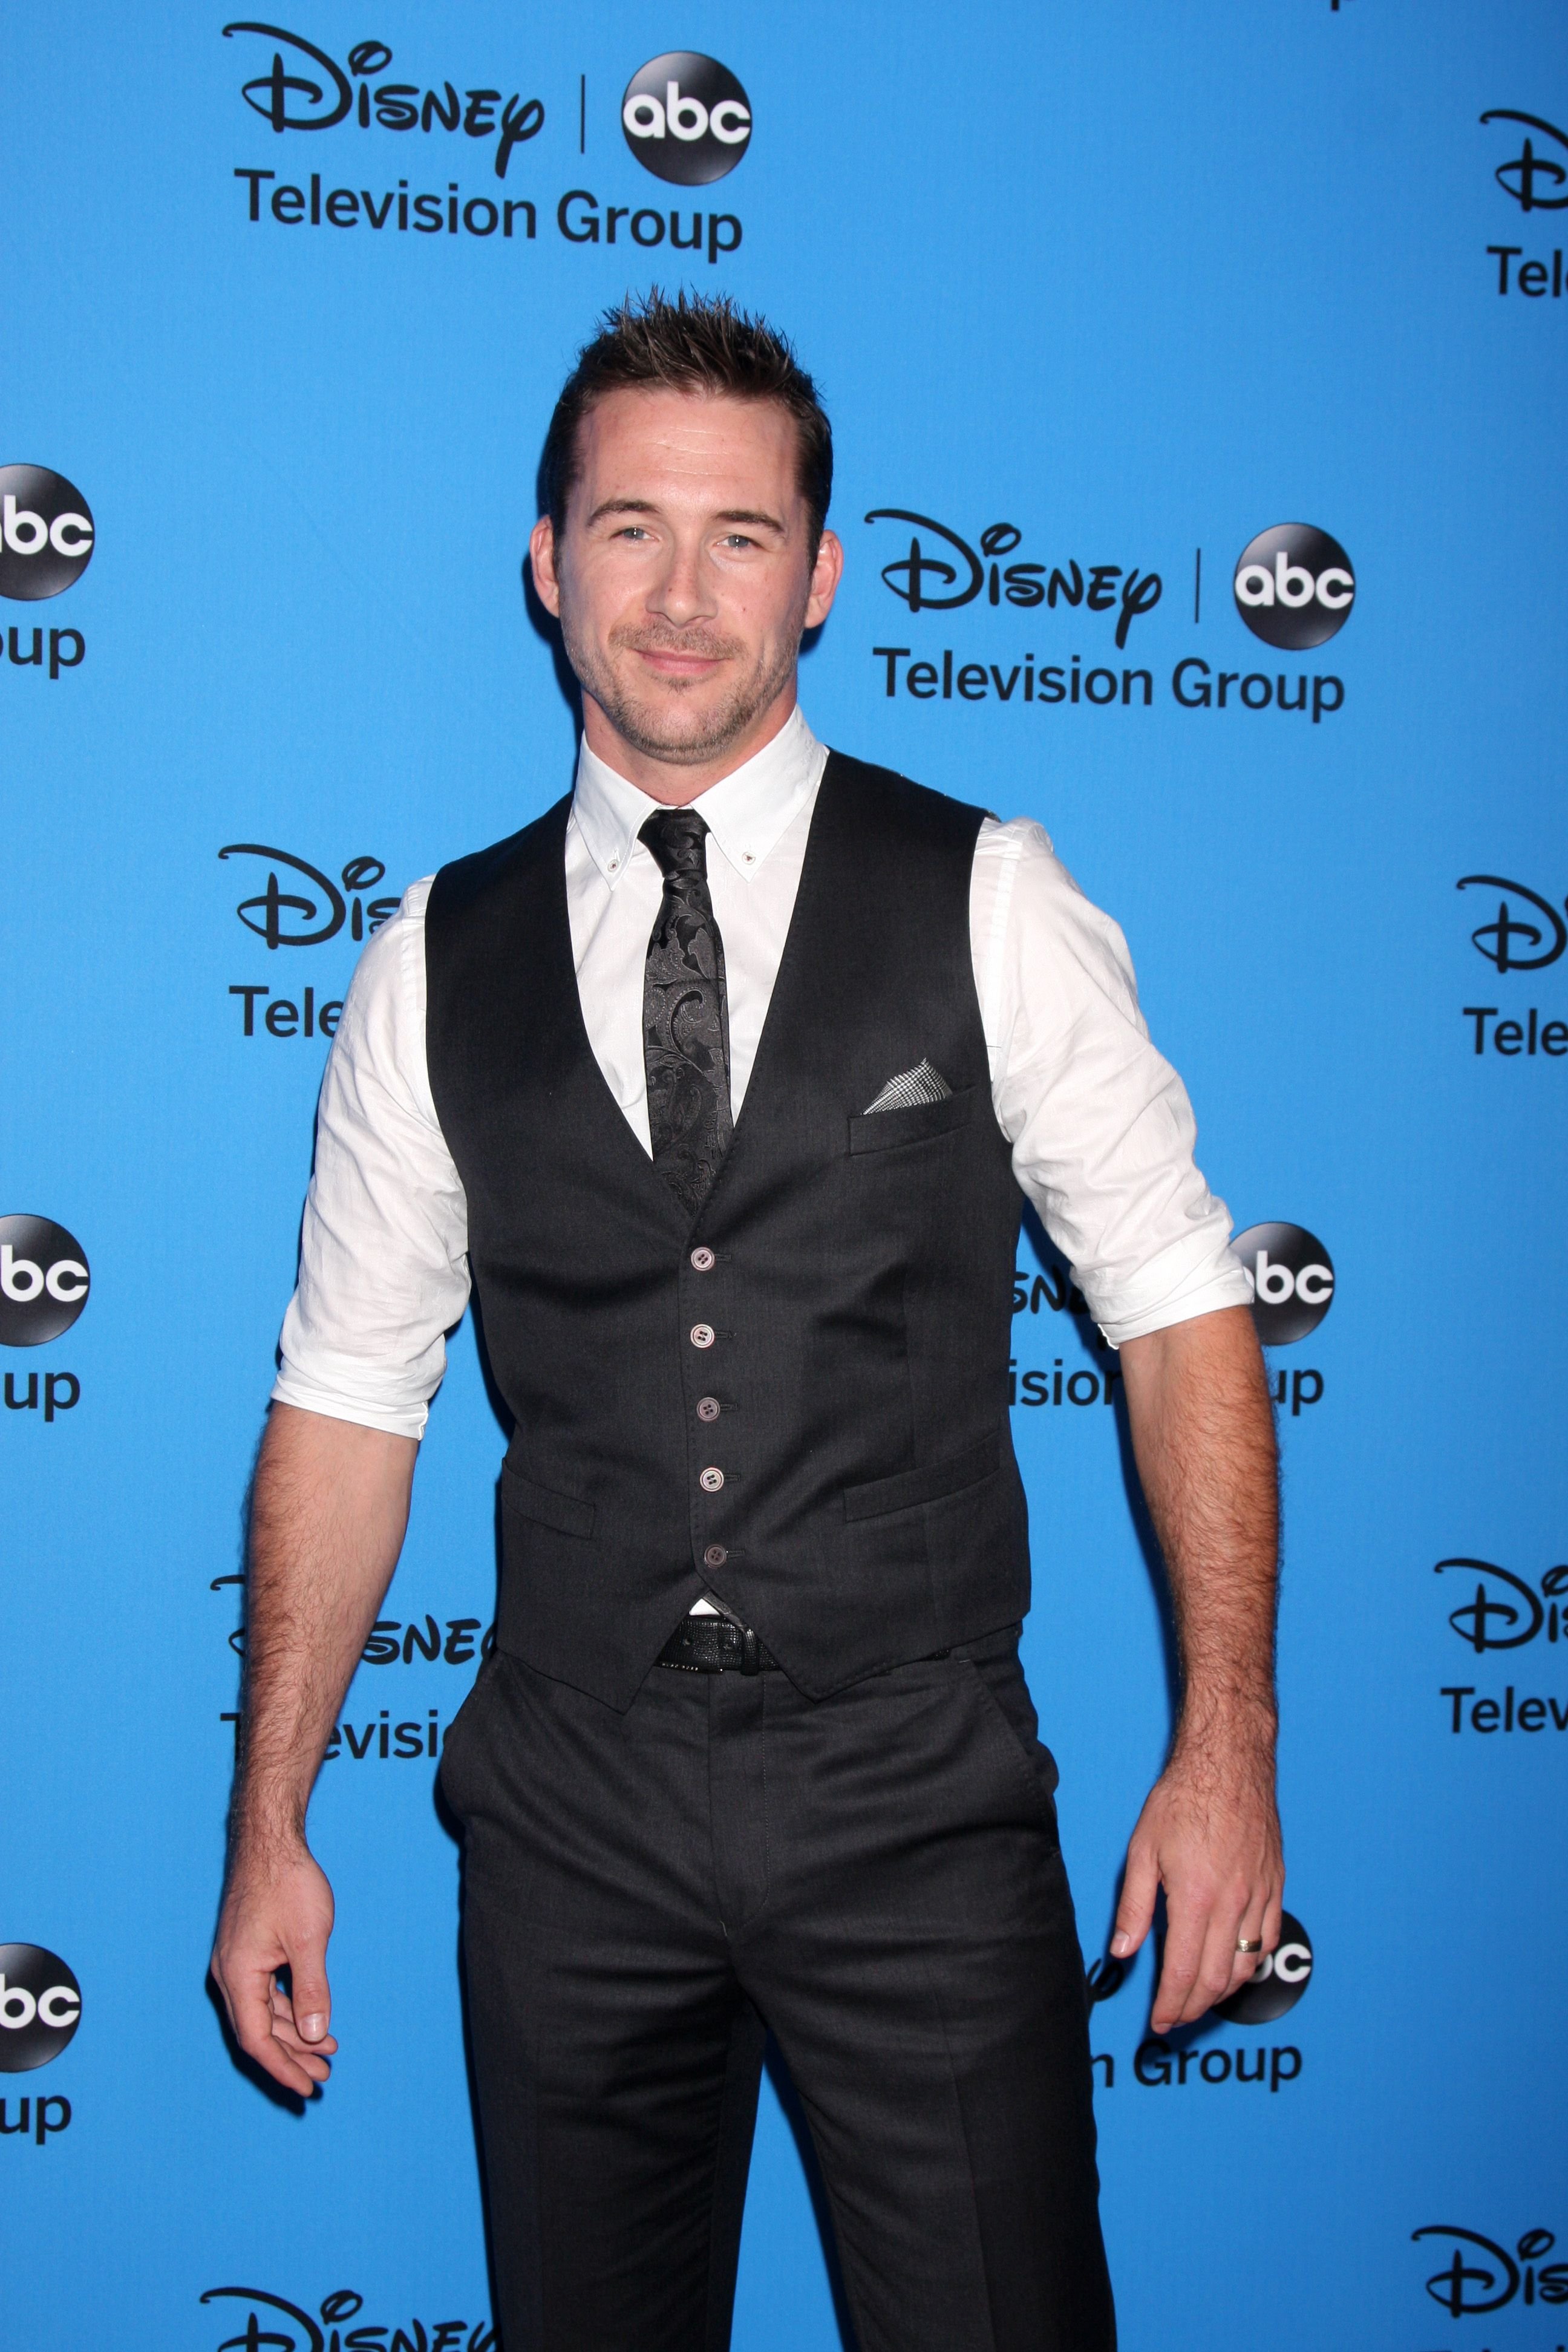 Barry Sloane arrives at the ABC Summer 2013 TCA Party at the Beverly Hilton Hotel on August 4, 2013 in Beverly Hills, CA. | Source: Shutterstock